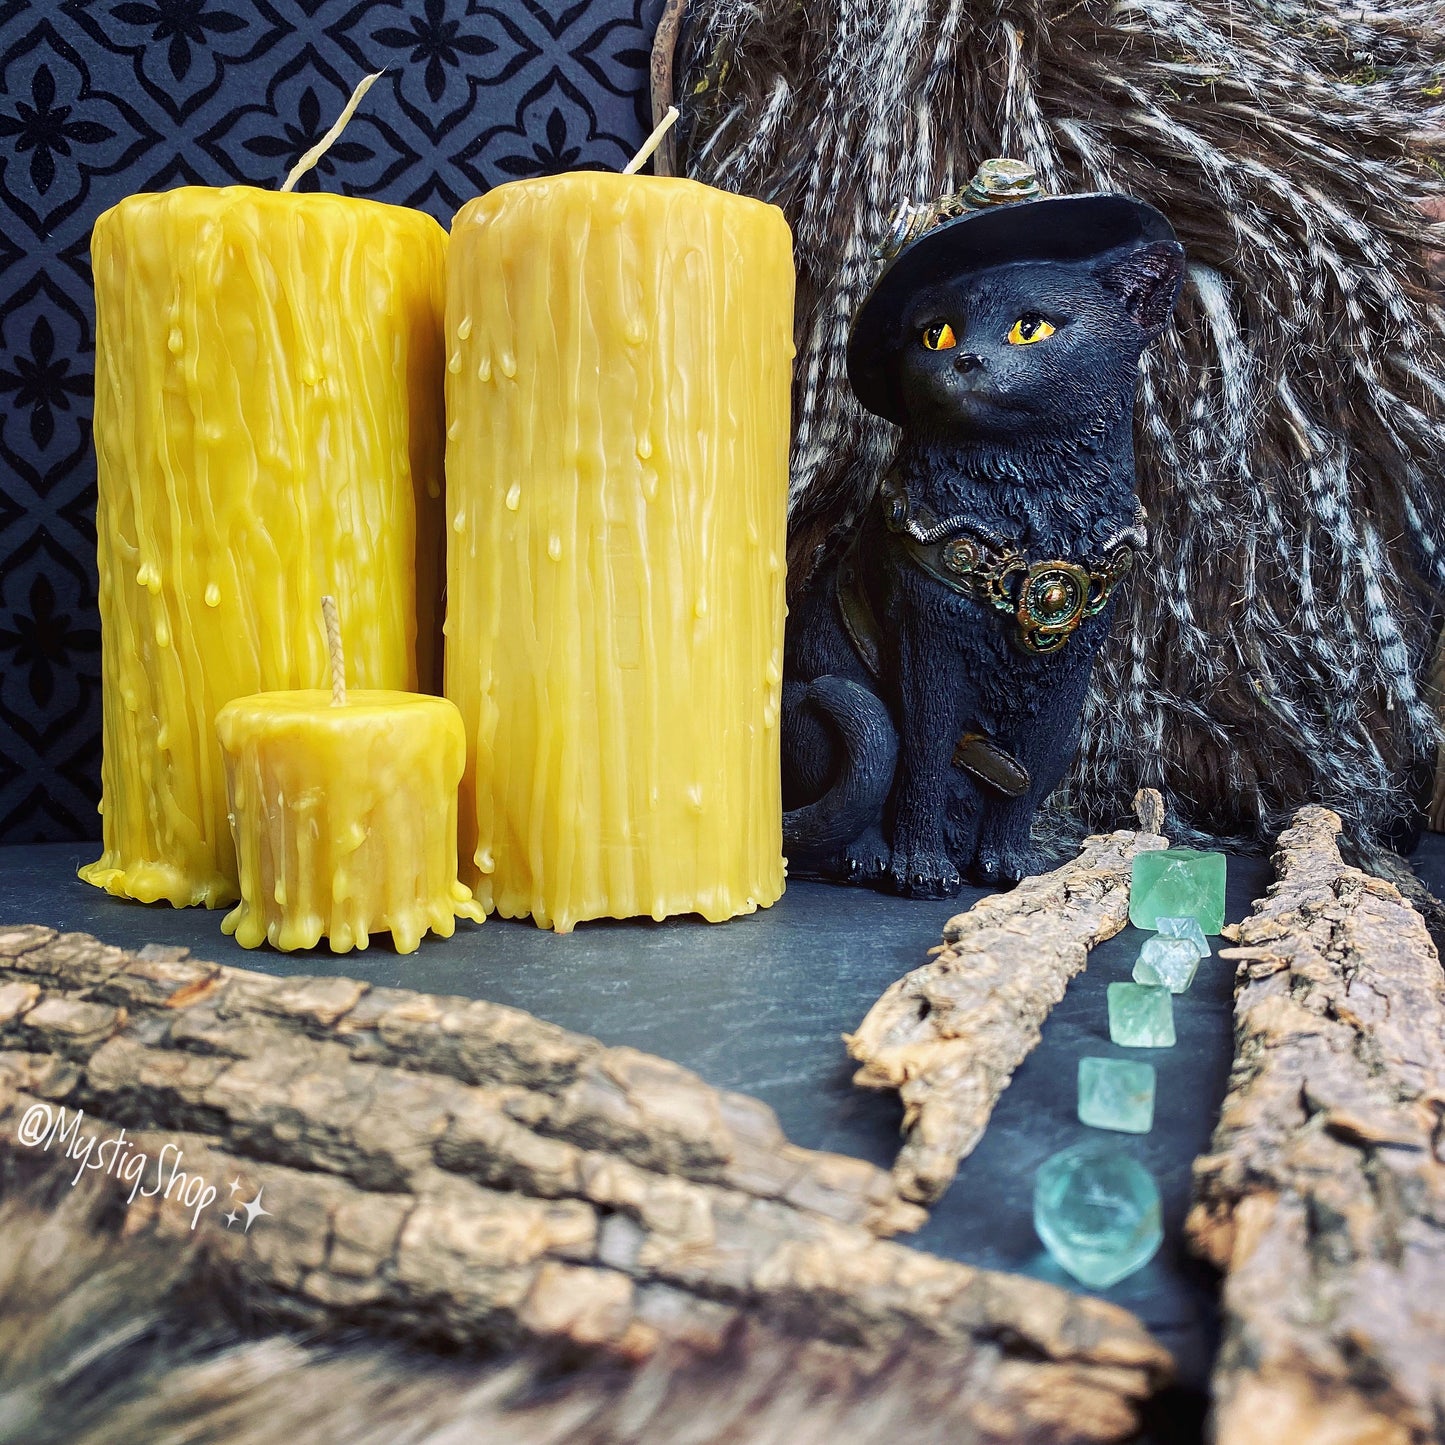 🕯Dungeon Beeswax Candles